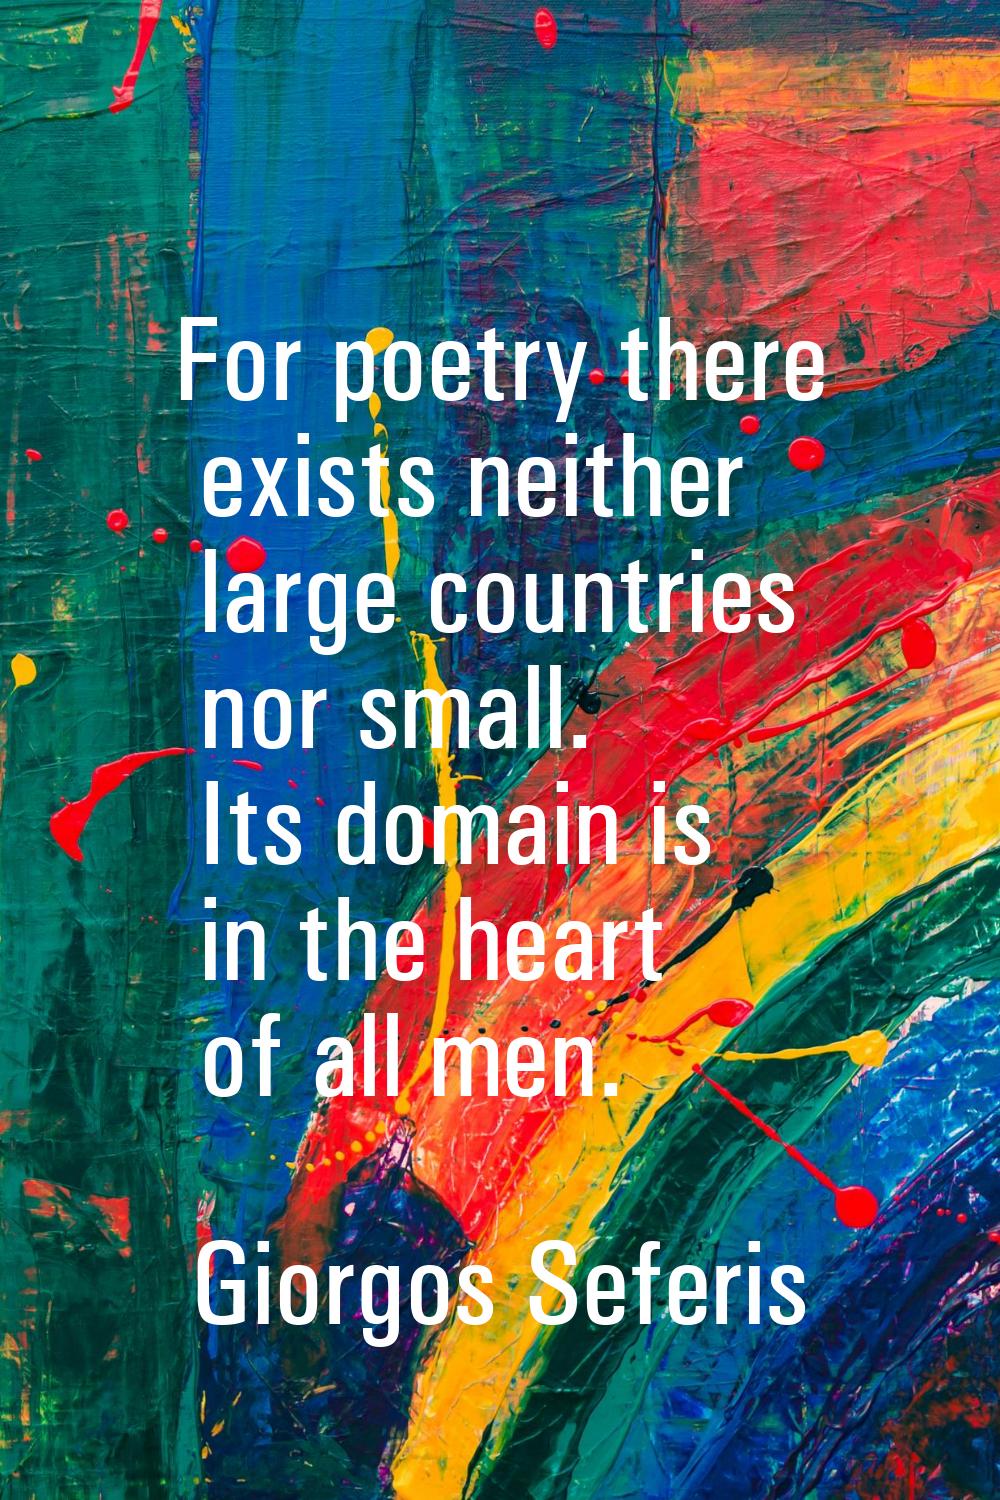 For poetry there exists neither large countries nor small. Its domain is in the heart of all men.